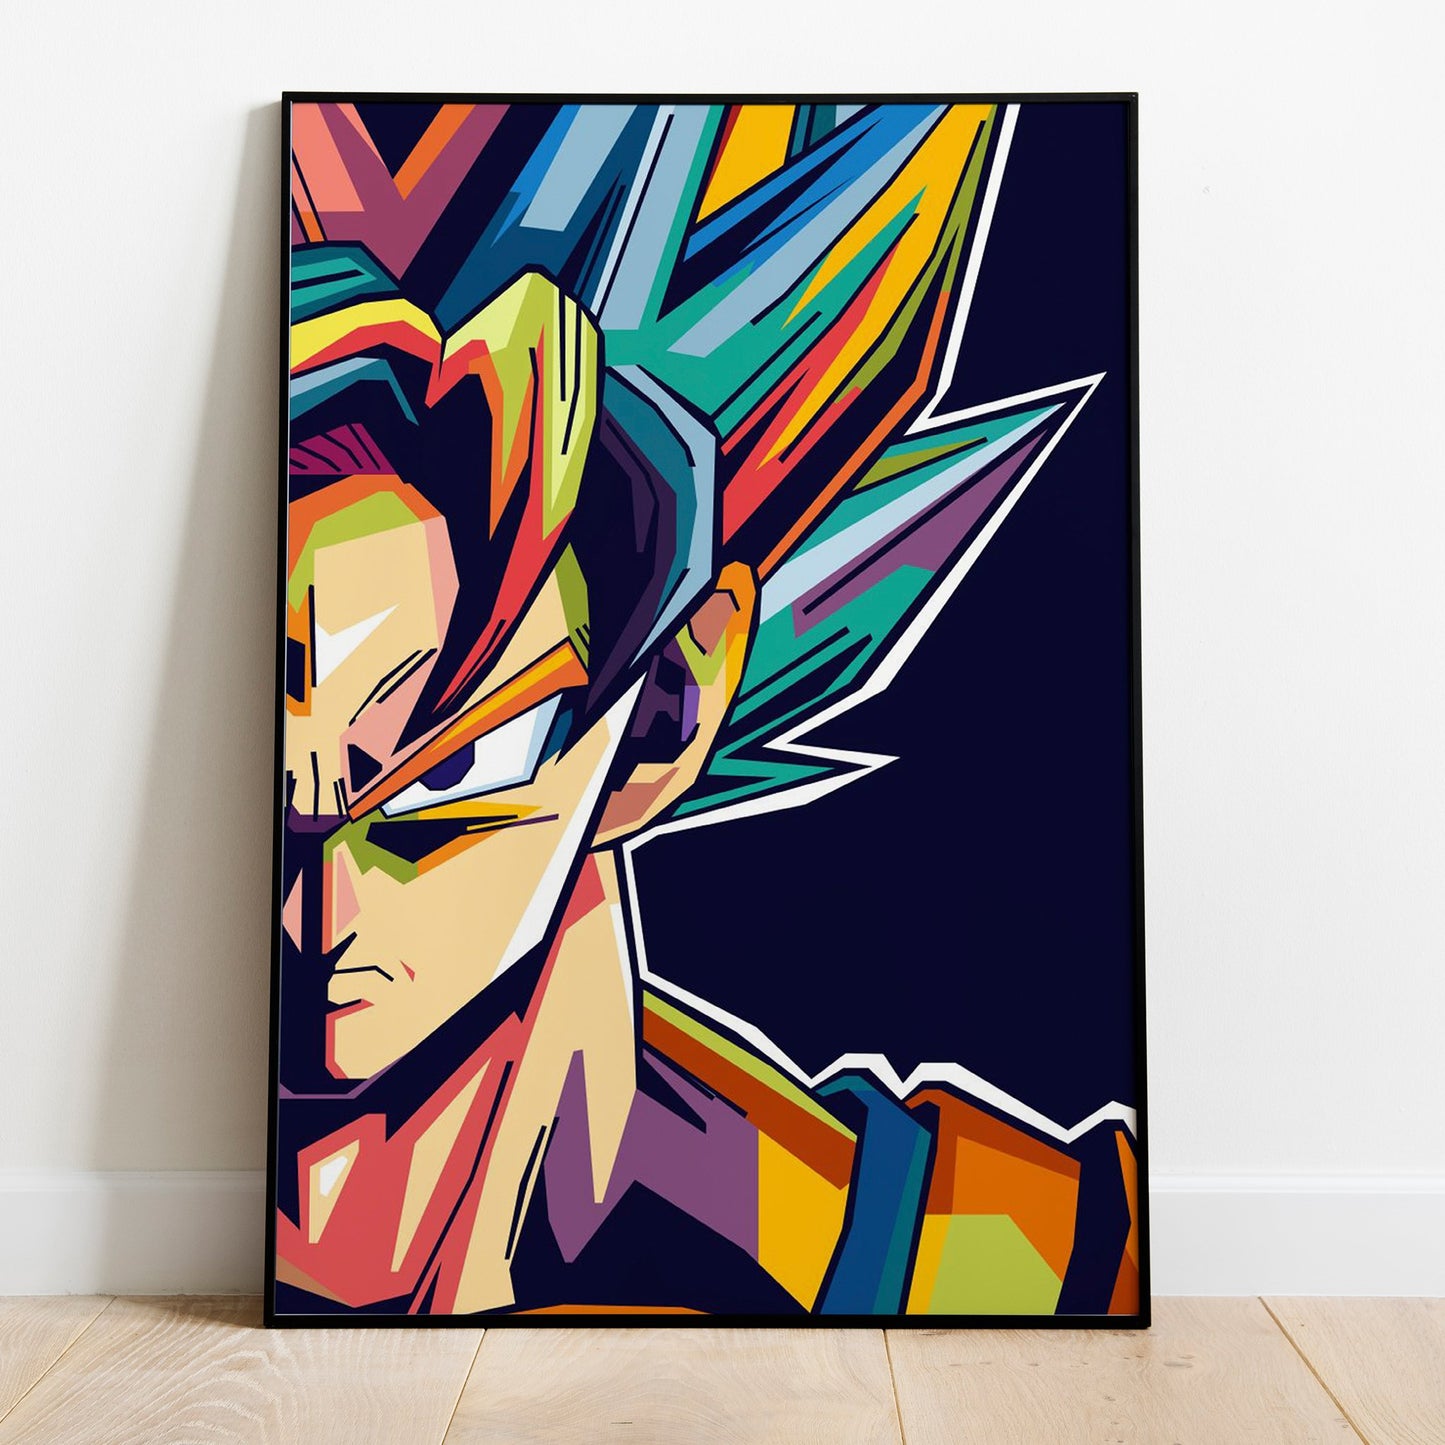 DRAGON BALL Z Wall Art Poster for Home Office